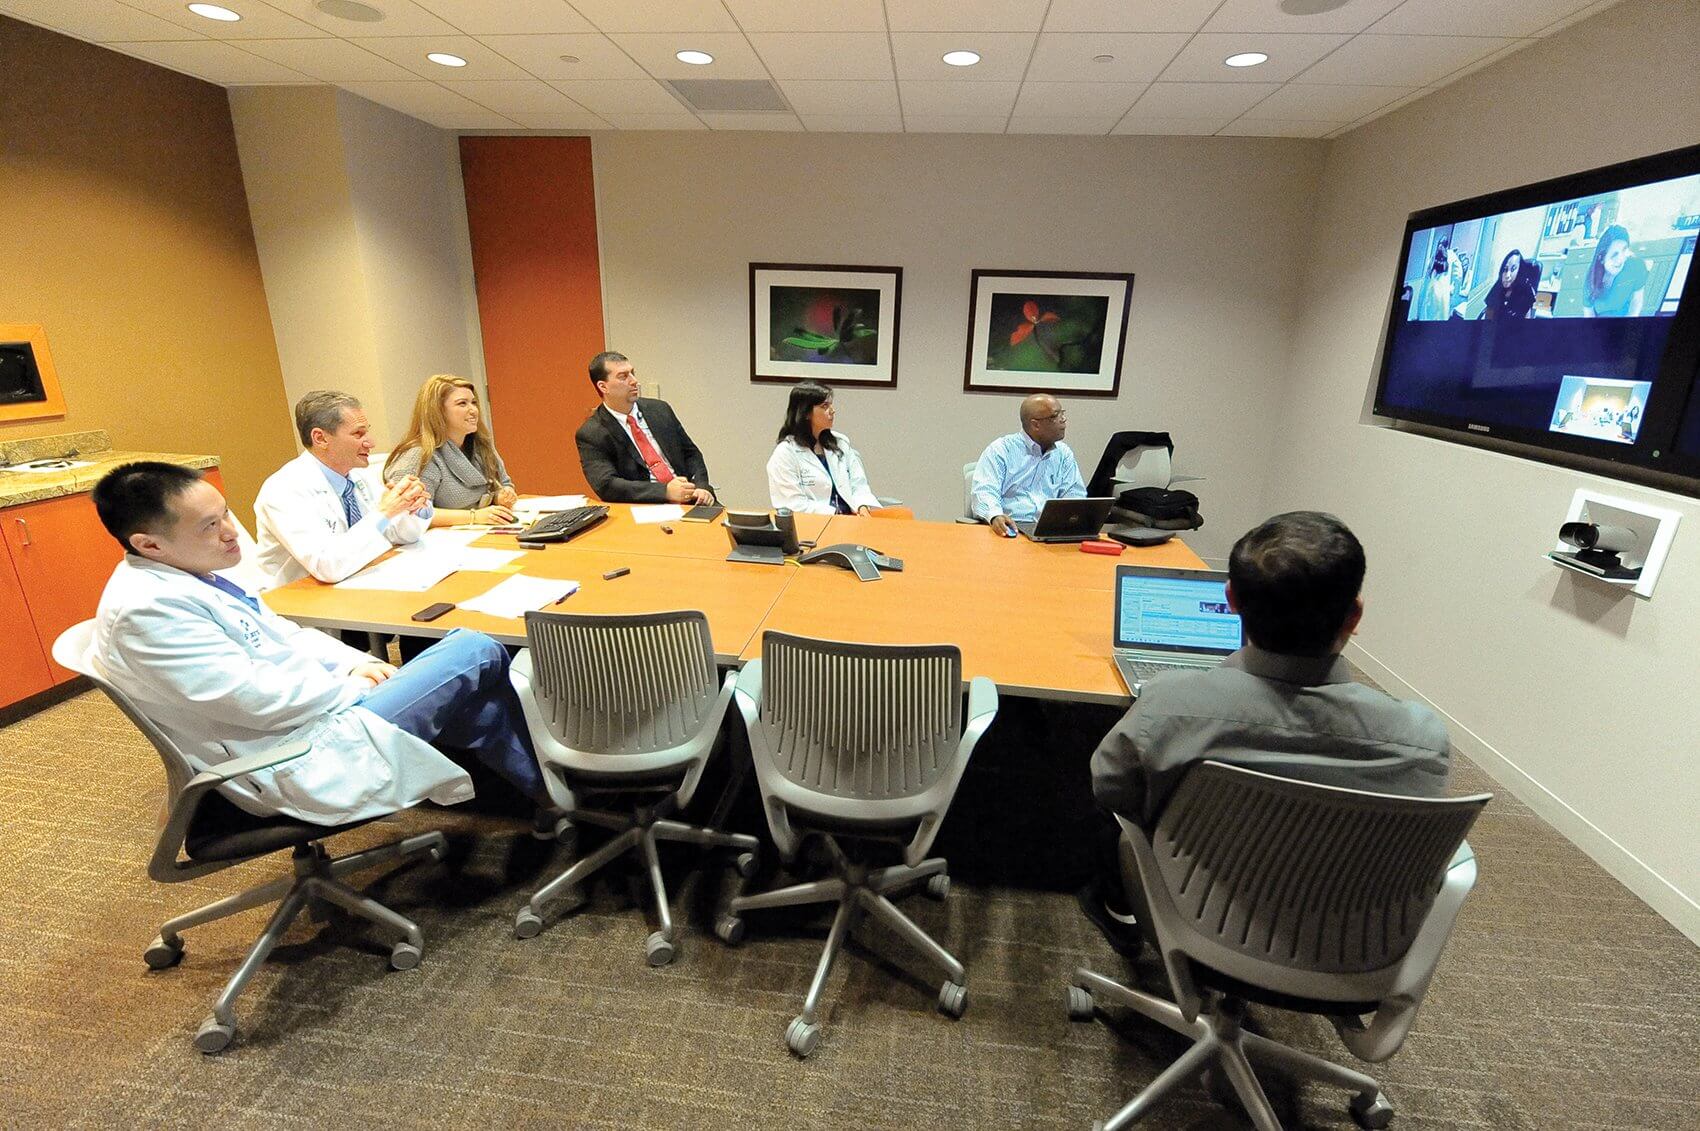 Project ECHO physicians sit in a conference room at Baylor St. Luke’s, consulting with community providers over teleconference. (Credit: Baylor St. Luke’s)